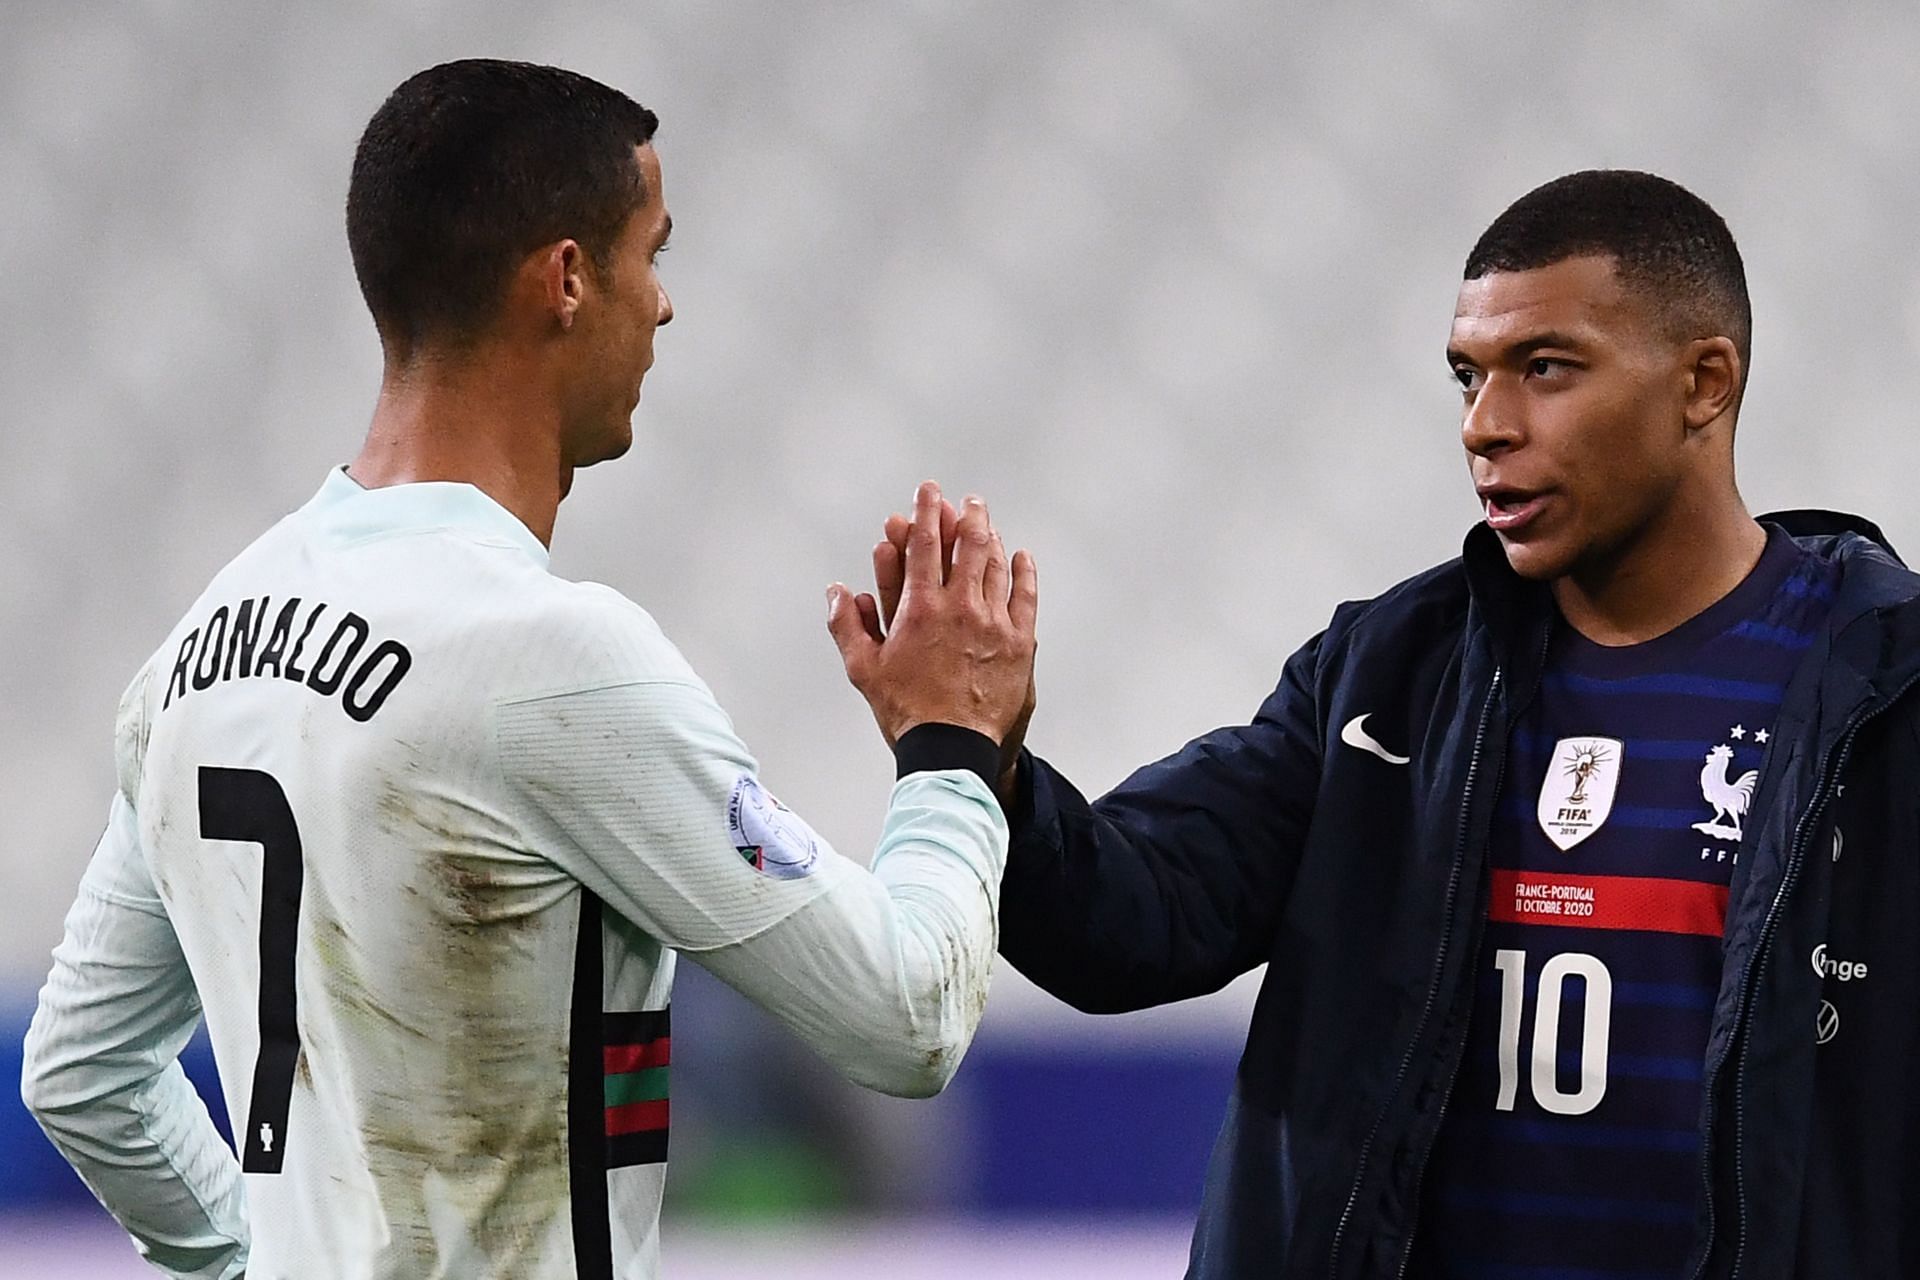 Cristiano Ronaldo dubbed Kylian Mbappe &#039;the future and the present&#039;.